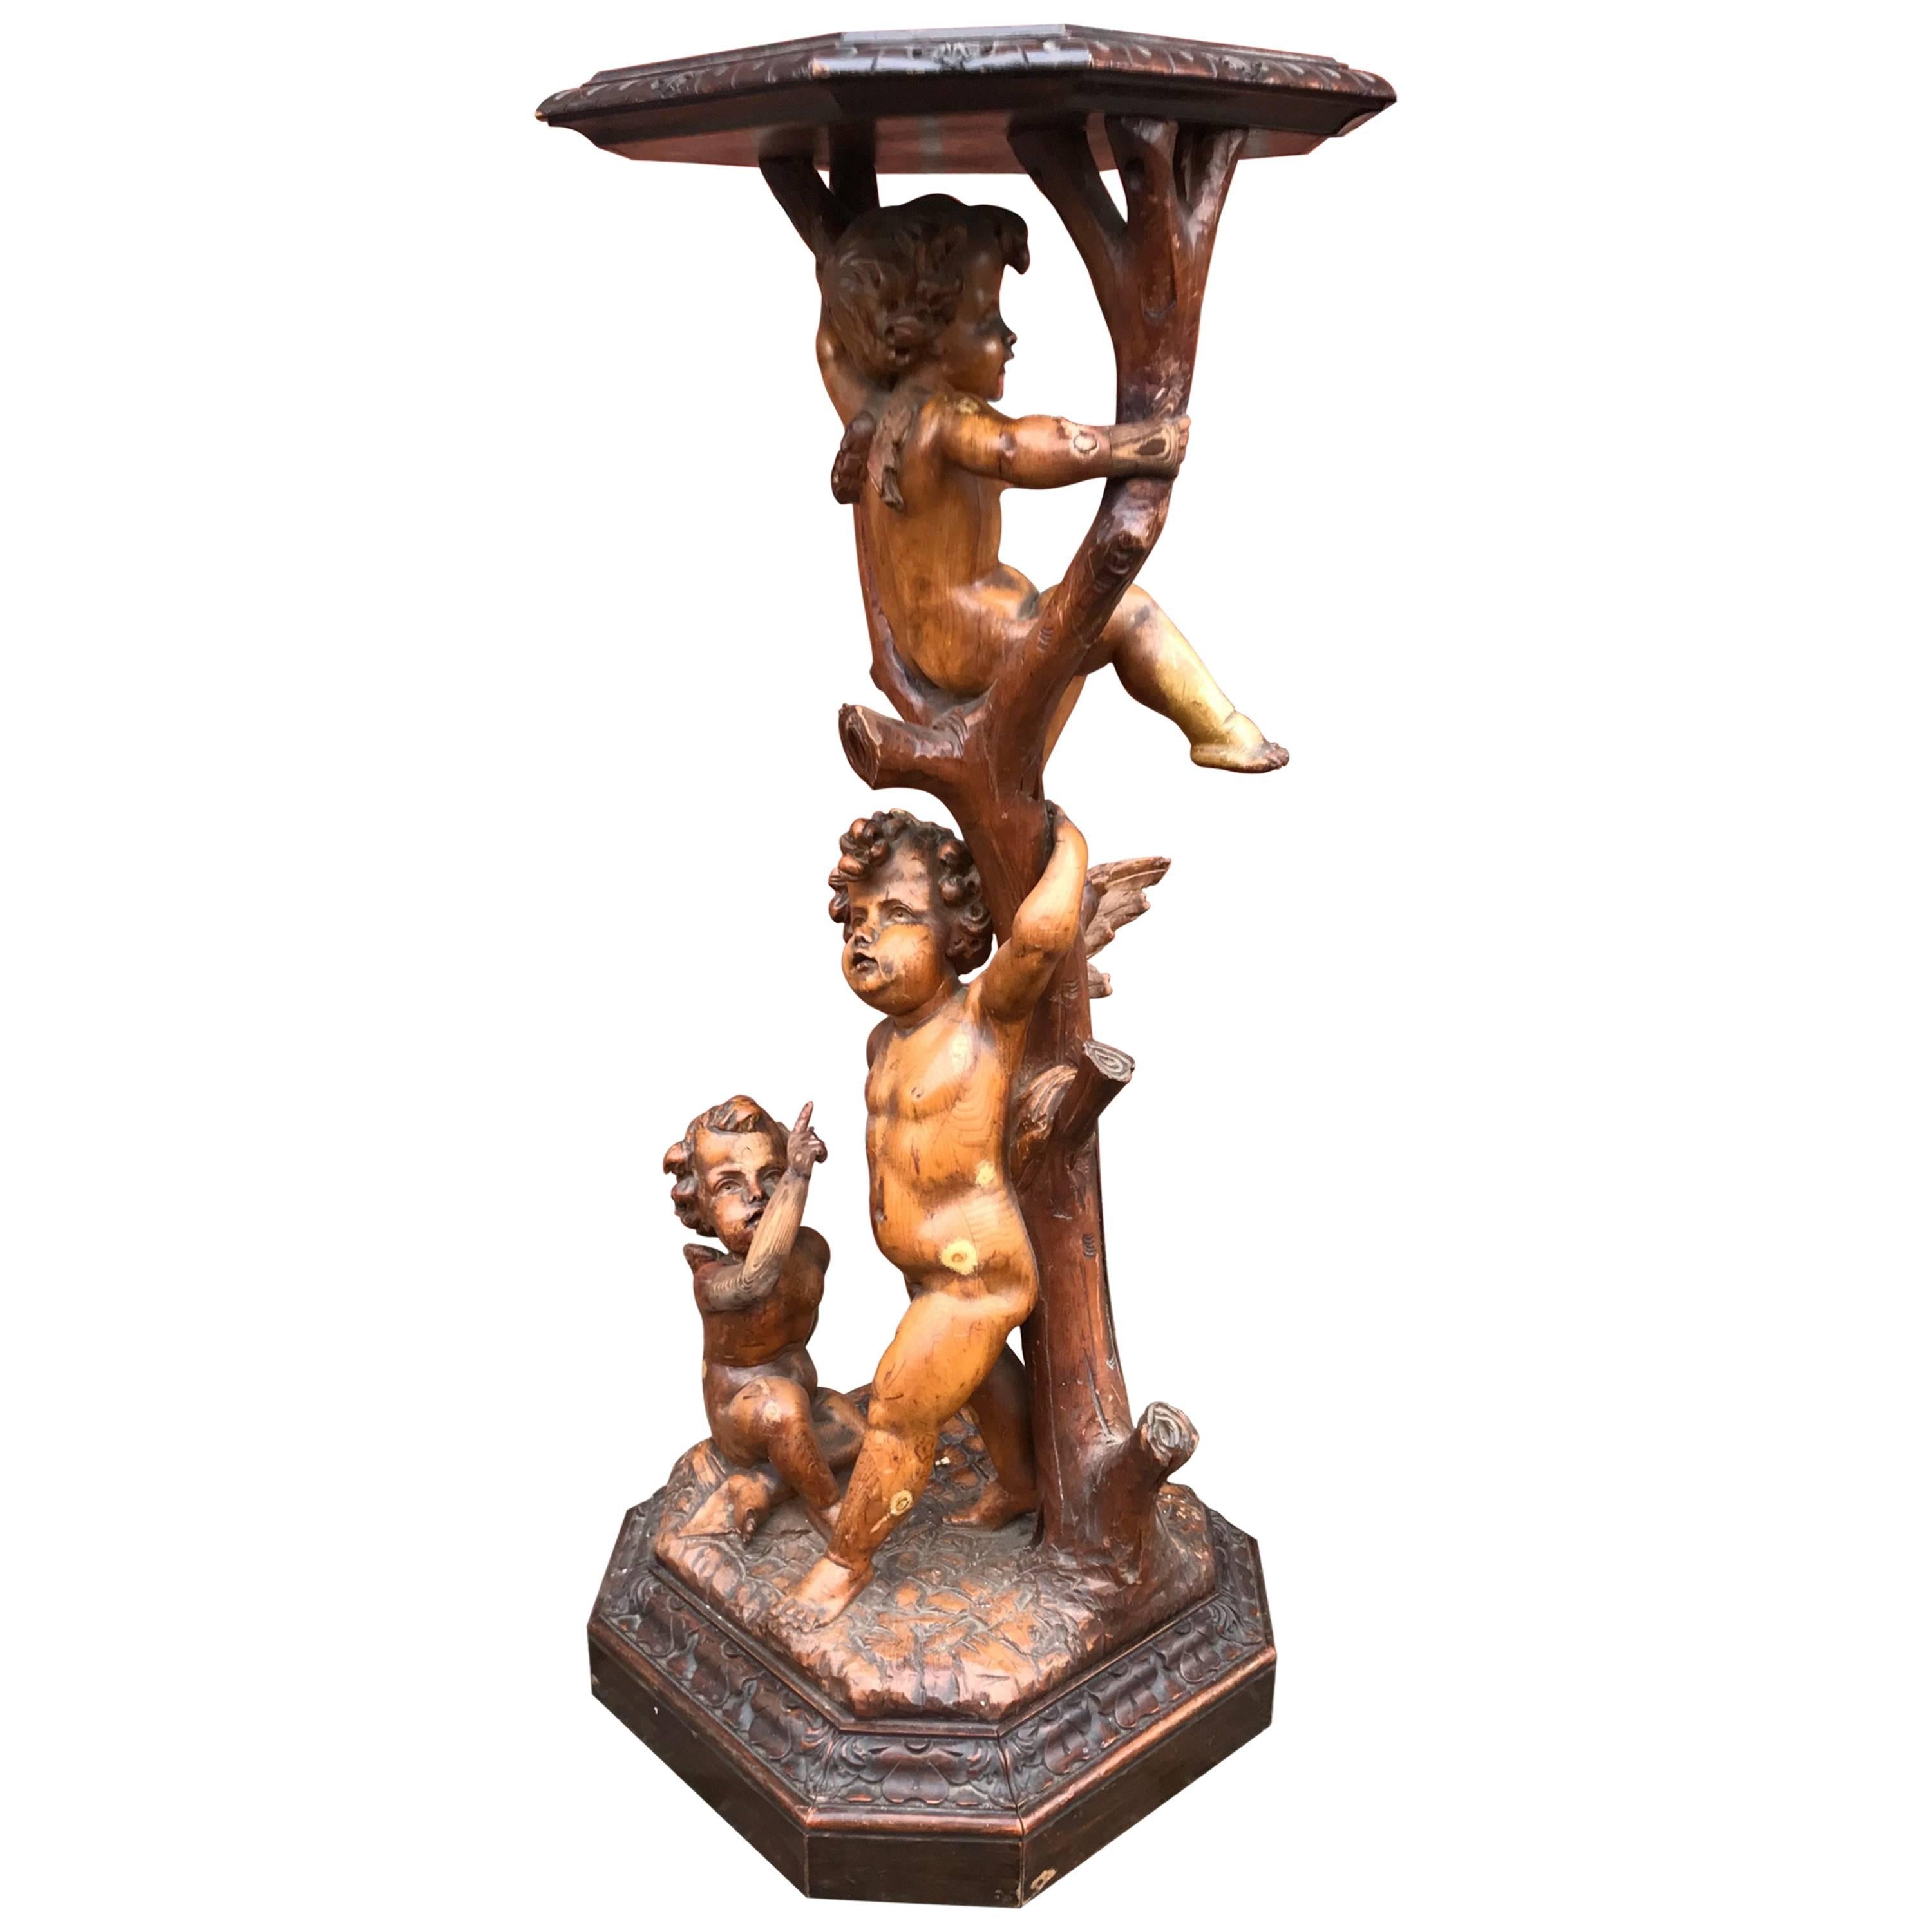 Antique Carved Baroque Style Playful Cherub Group Center Display Stand Pedestal